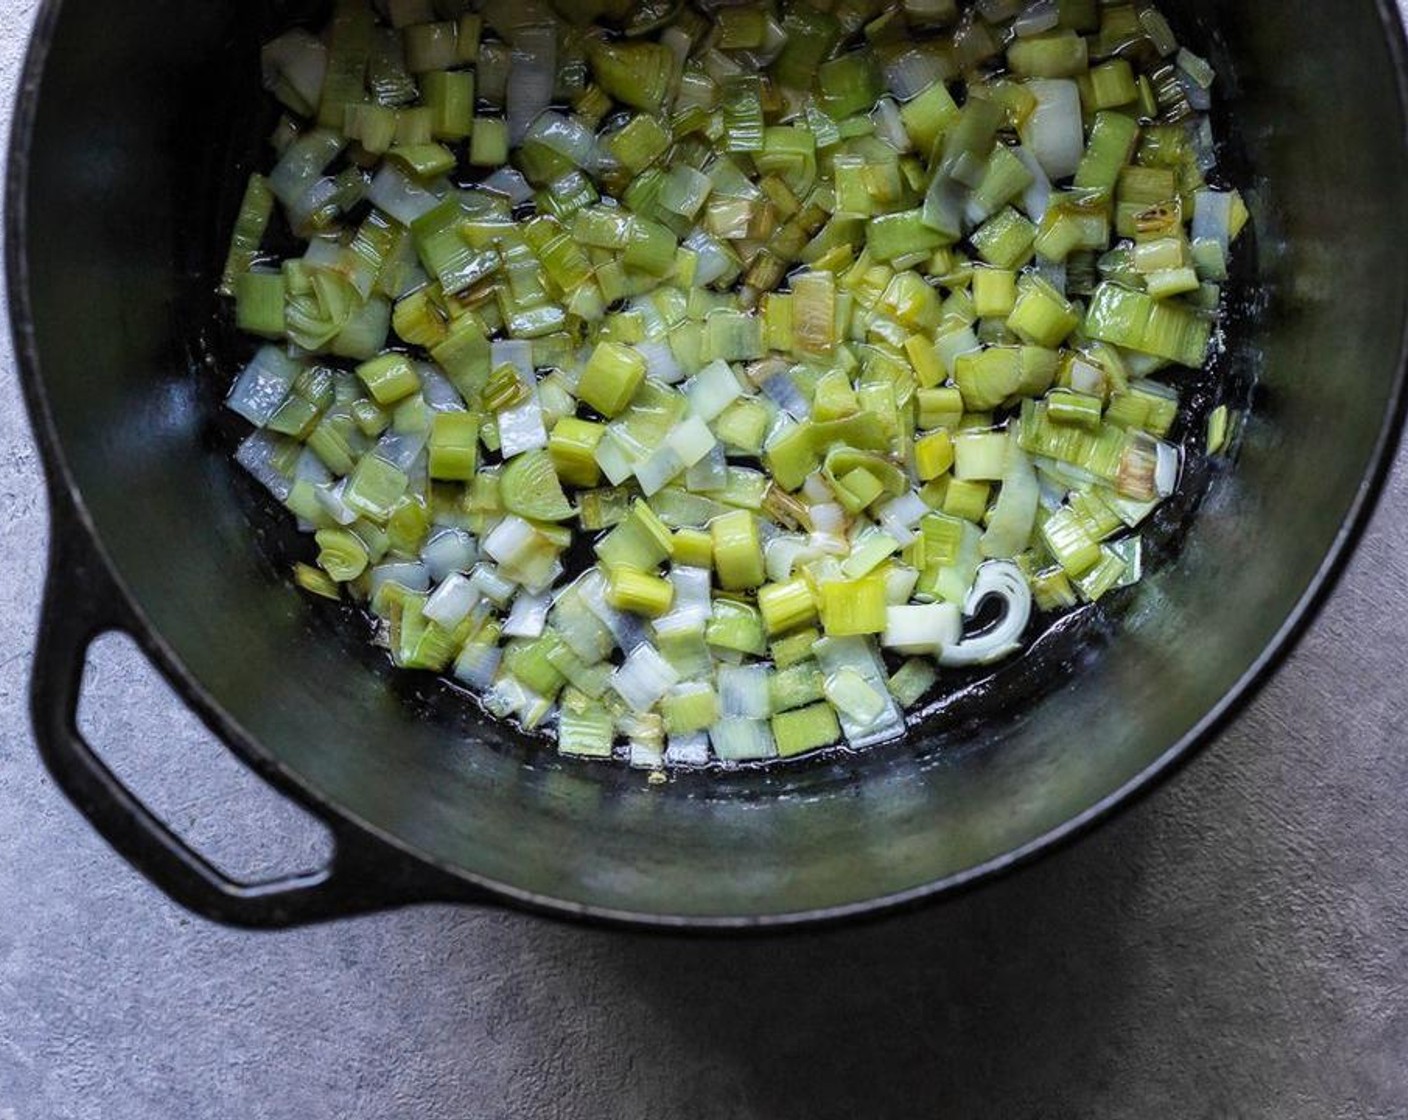 step 4 In a medium pot, melt 3 tablespoon of Butter (3 Tbsp) over low heat and add the sliced leeks to the melted butter. Stir to coat the leeks in butter and simmer over low heat for about 20 minutes, stirring often until leeks are soft and tender without browning.